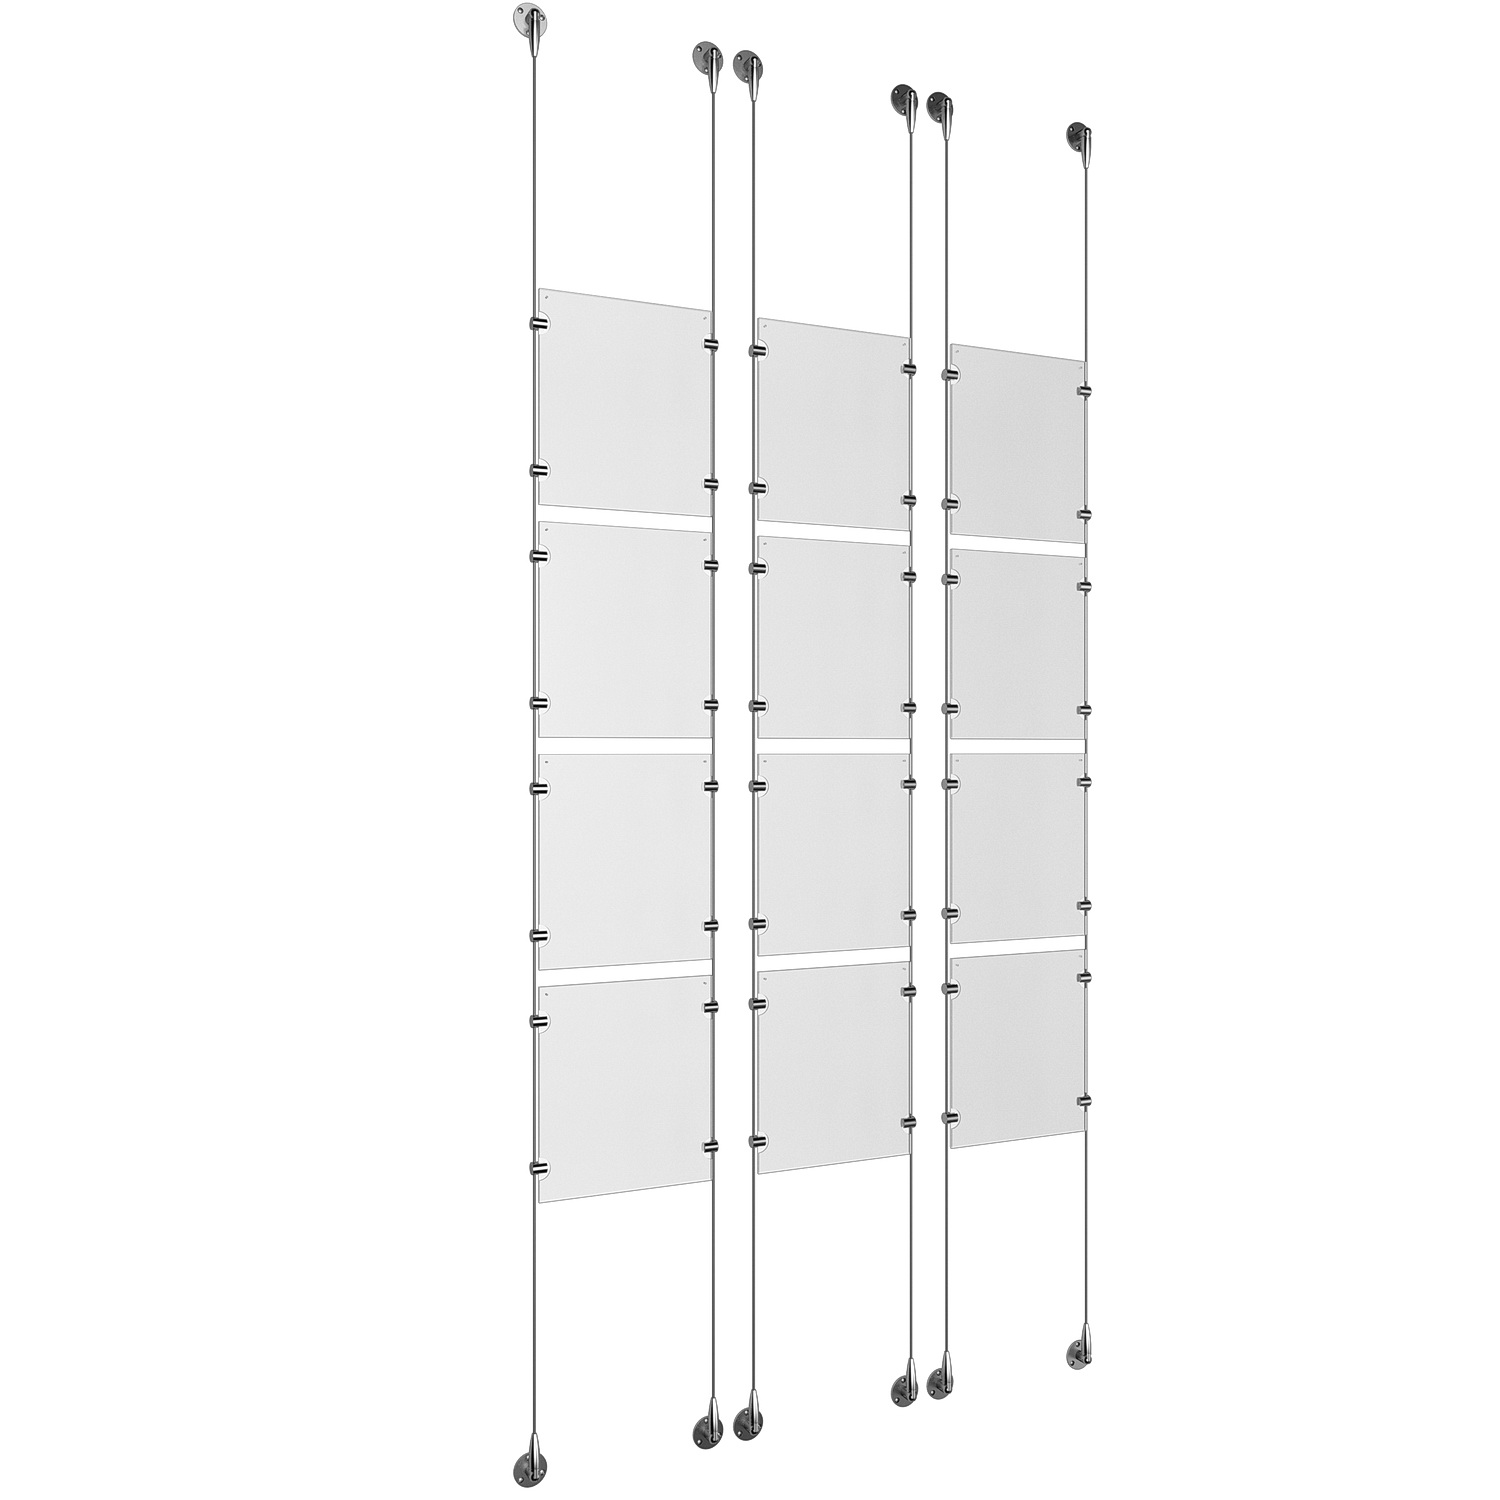 (12) 8-1/2'' Width x 11'' Height Clear Acrylic Frame & (6) Stainless Steel Satin Brushed Adjustable Angle Signature 1/8'' Cable Systems with (48) Single-Sided Panel Grippers